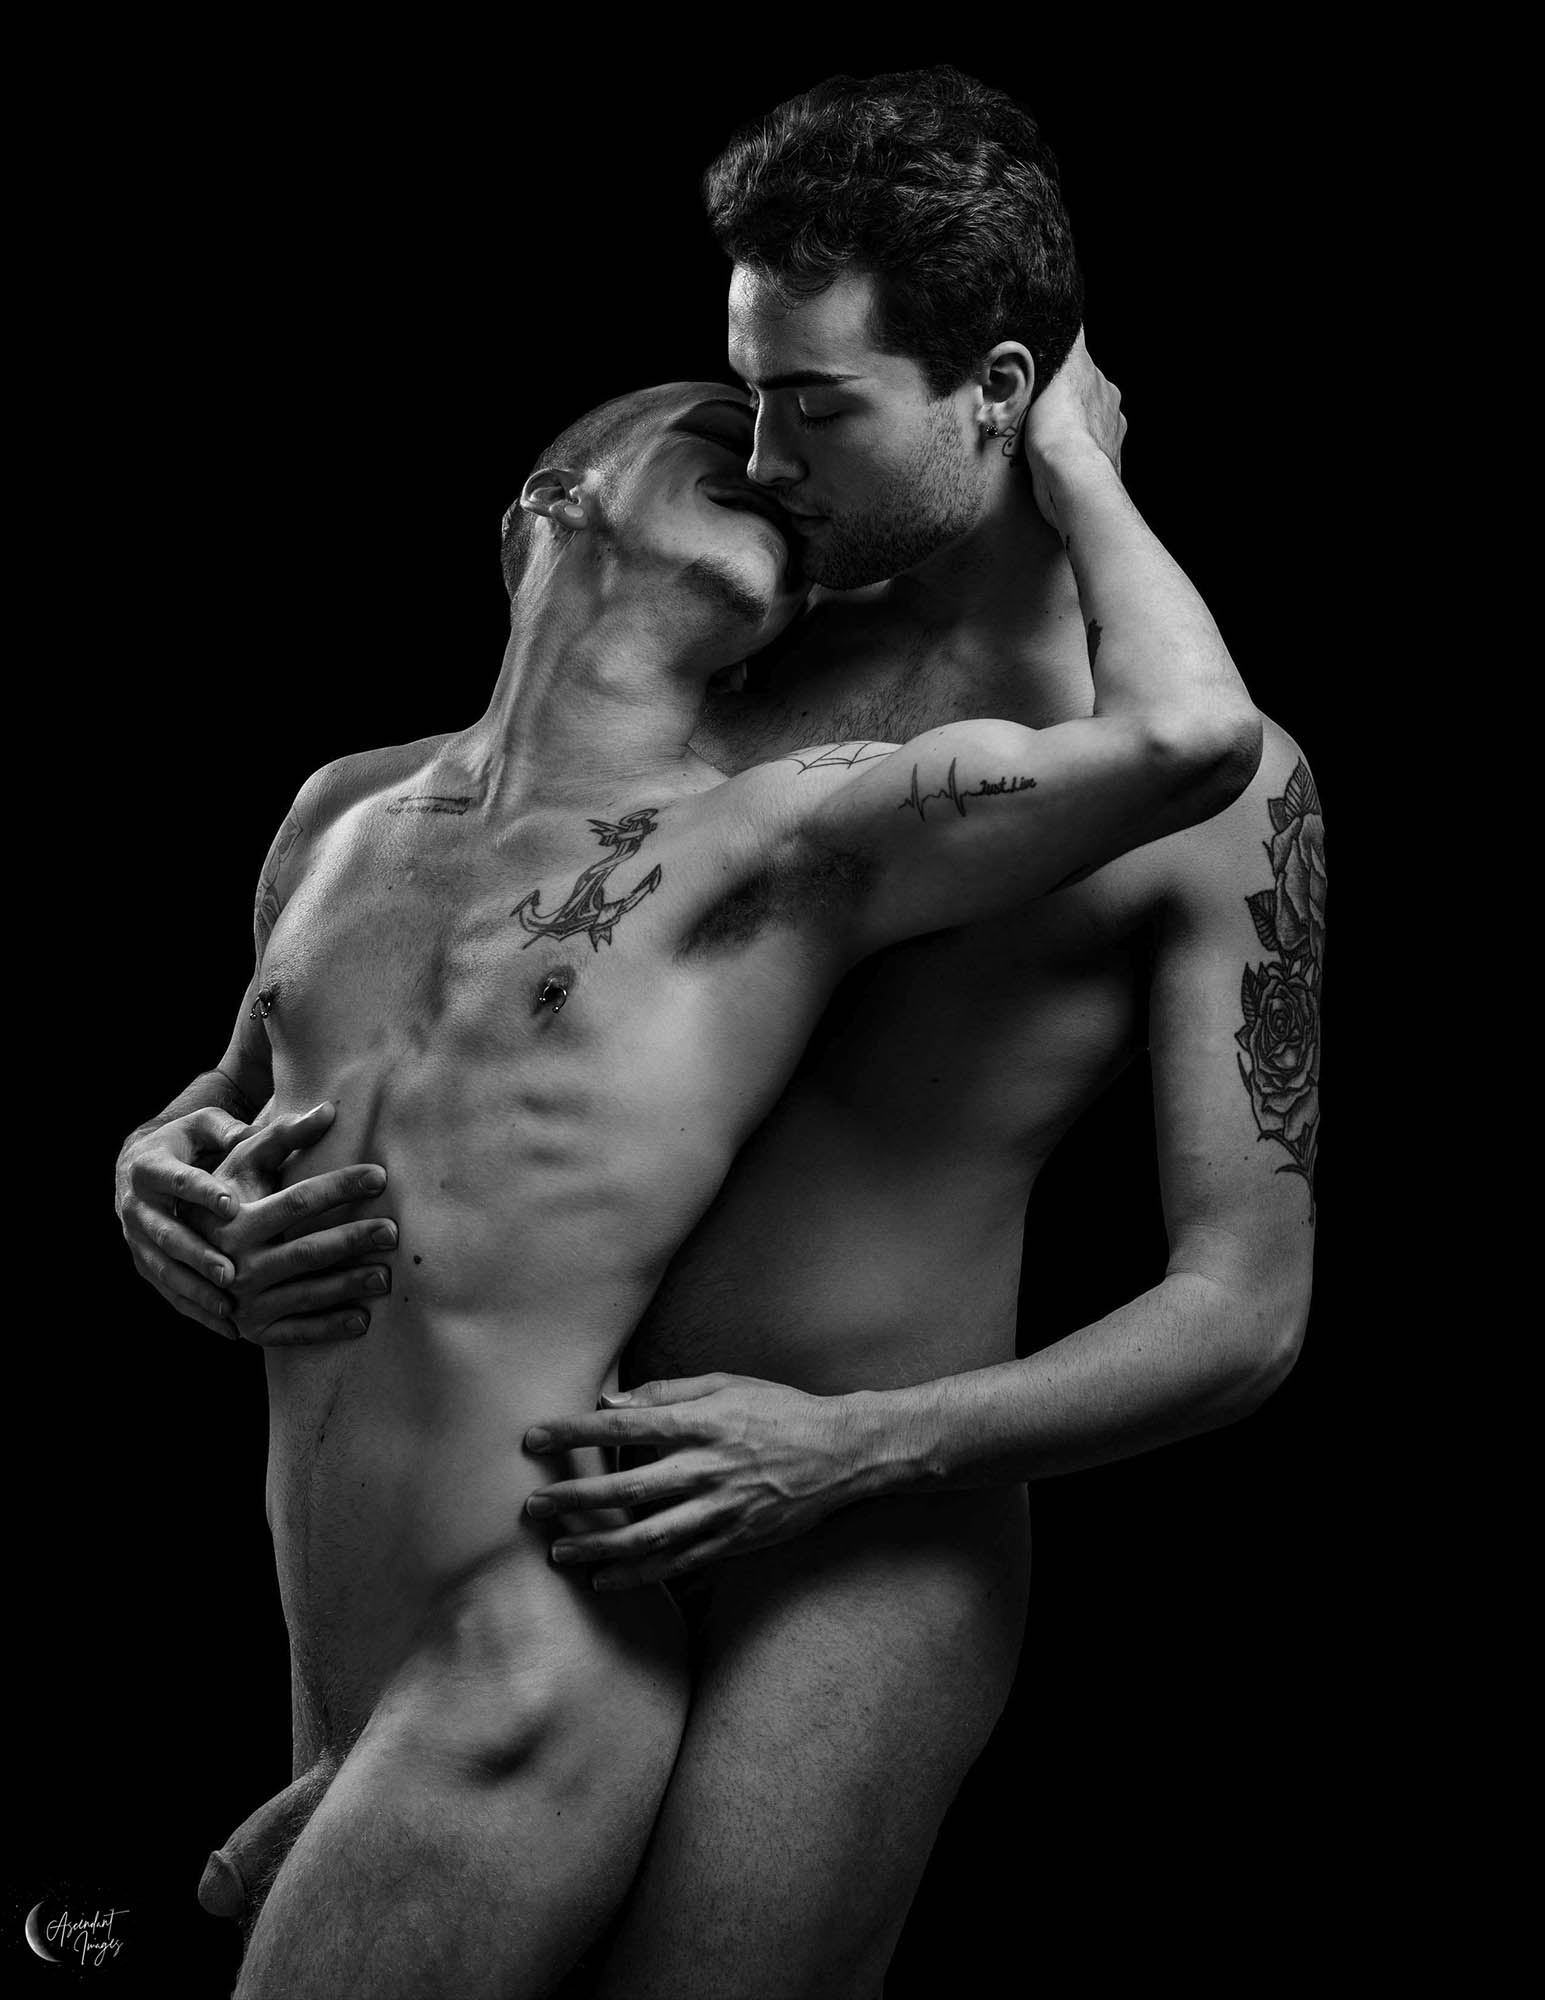 – NSFW – Dylan Headley & Christian Mink by Ryleigh Henry.